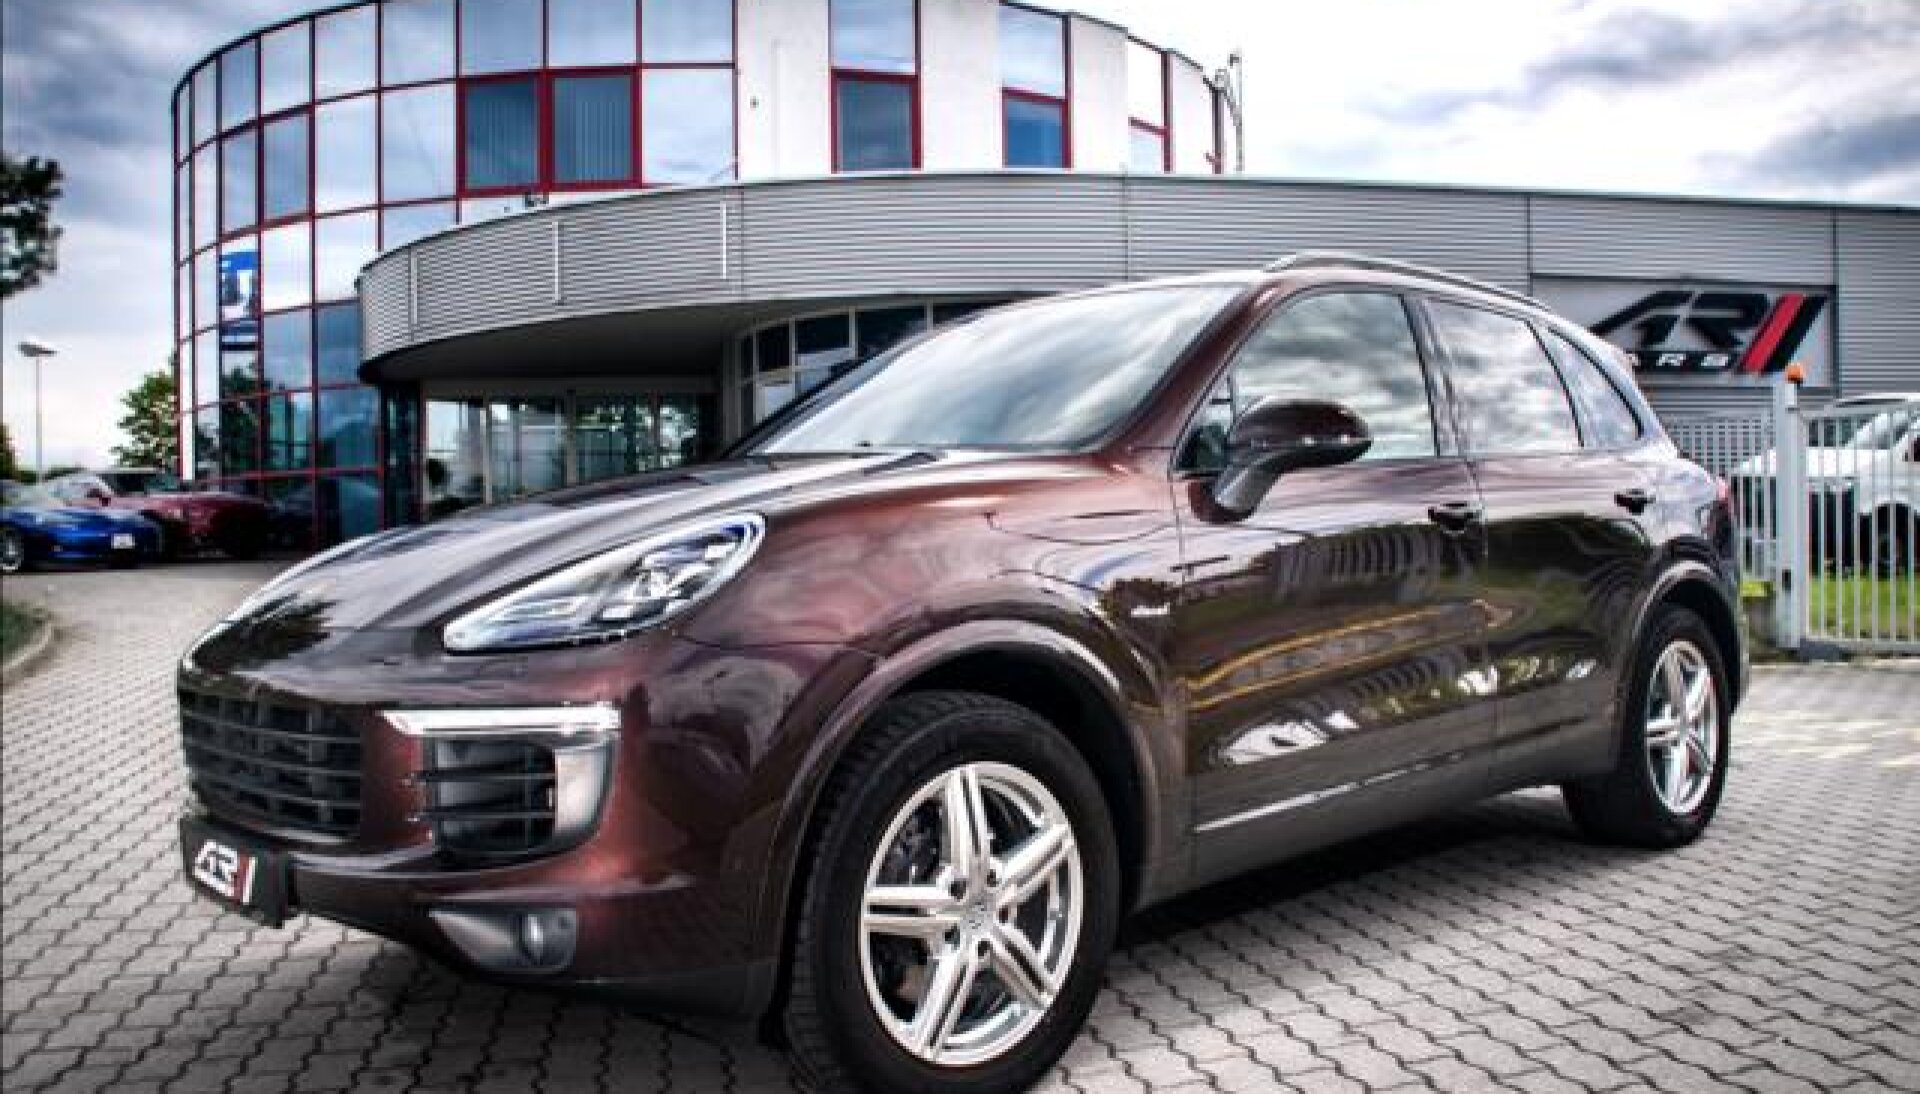 Porsche Cayenne Diesel, vzduch, LED PDLS, panorama, ventilace, BOS